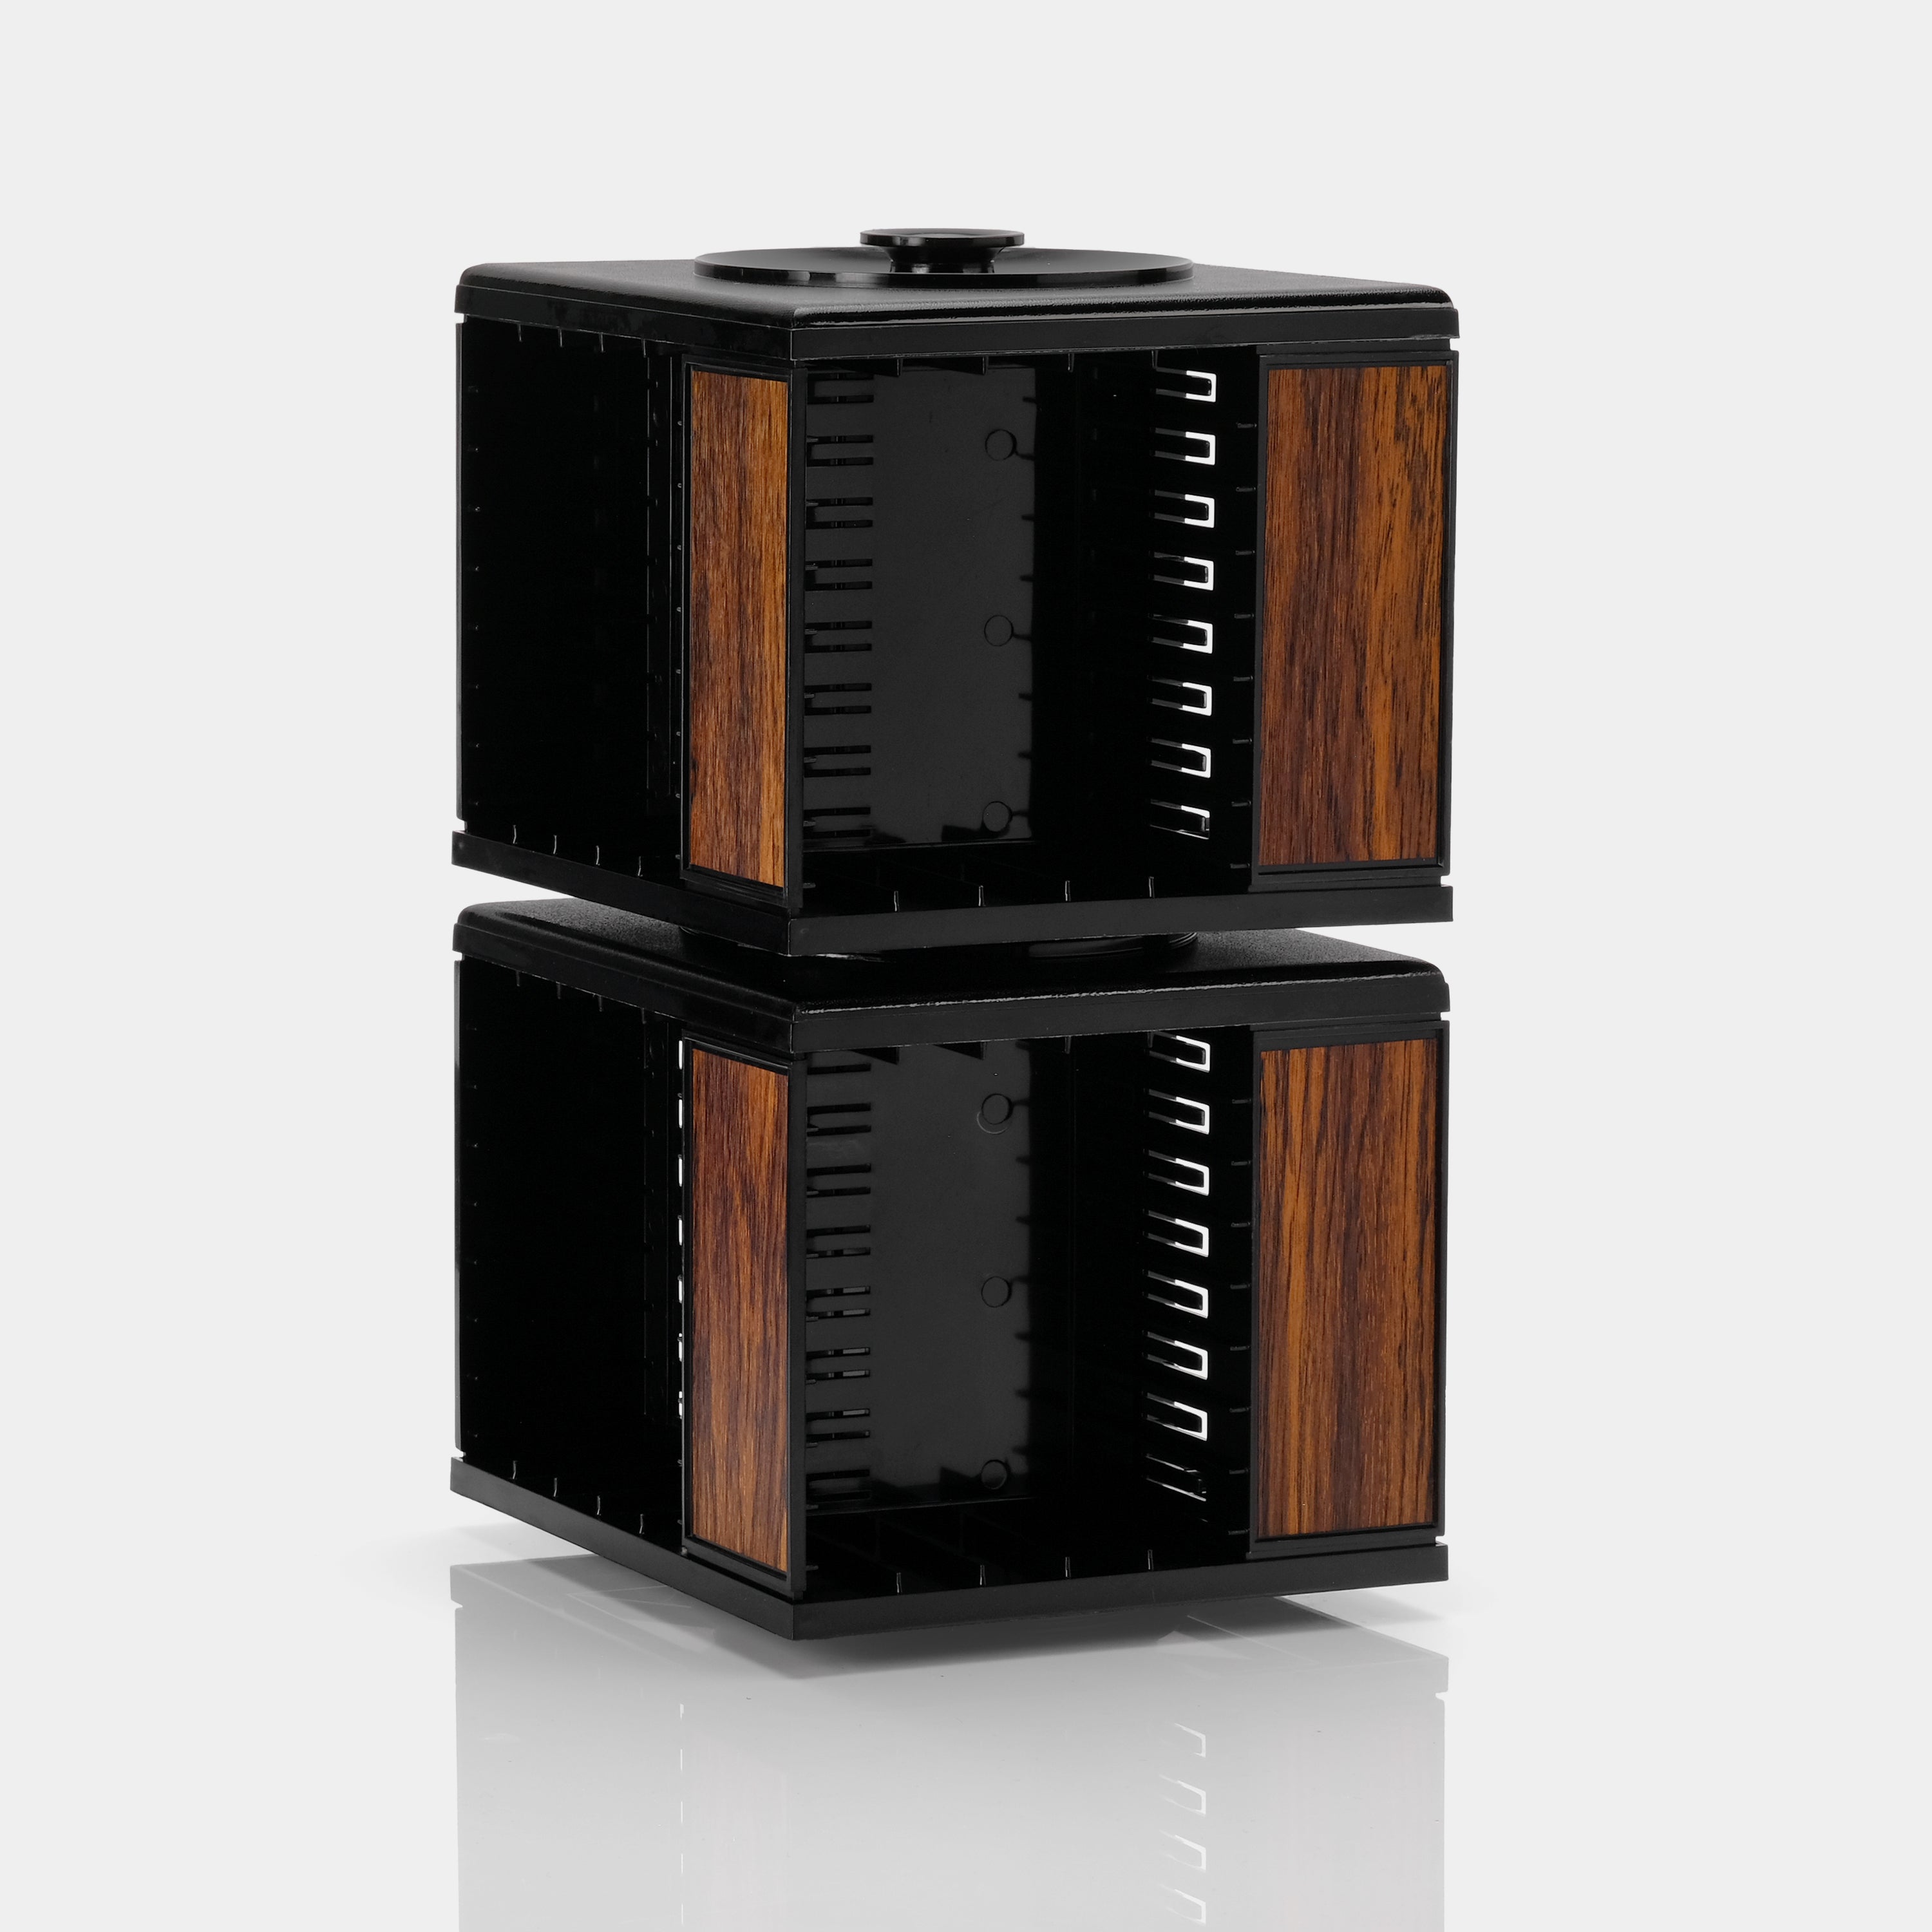 Black with Brown Wood Plastic Stacking Rotating Cassette Storage Display (Set of 2)